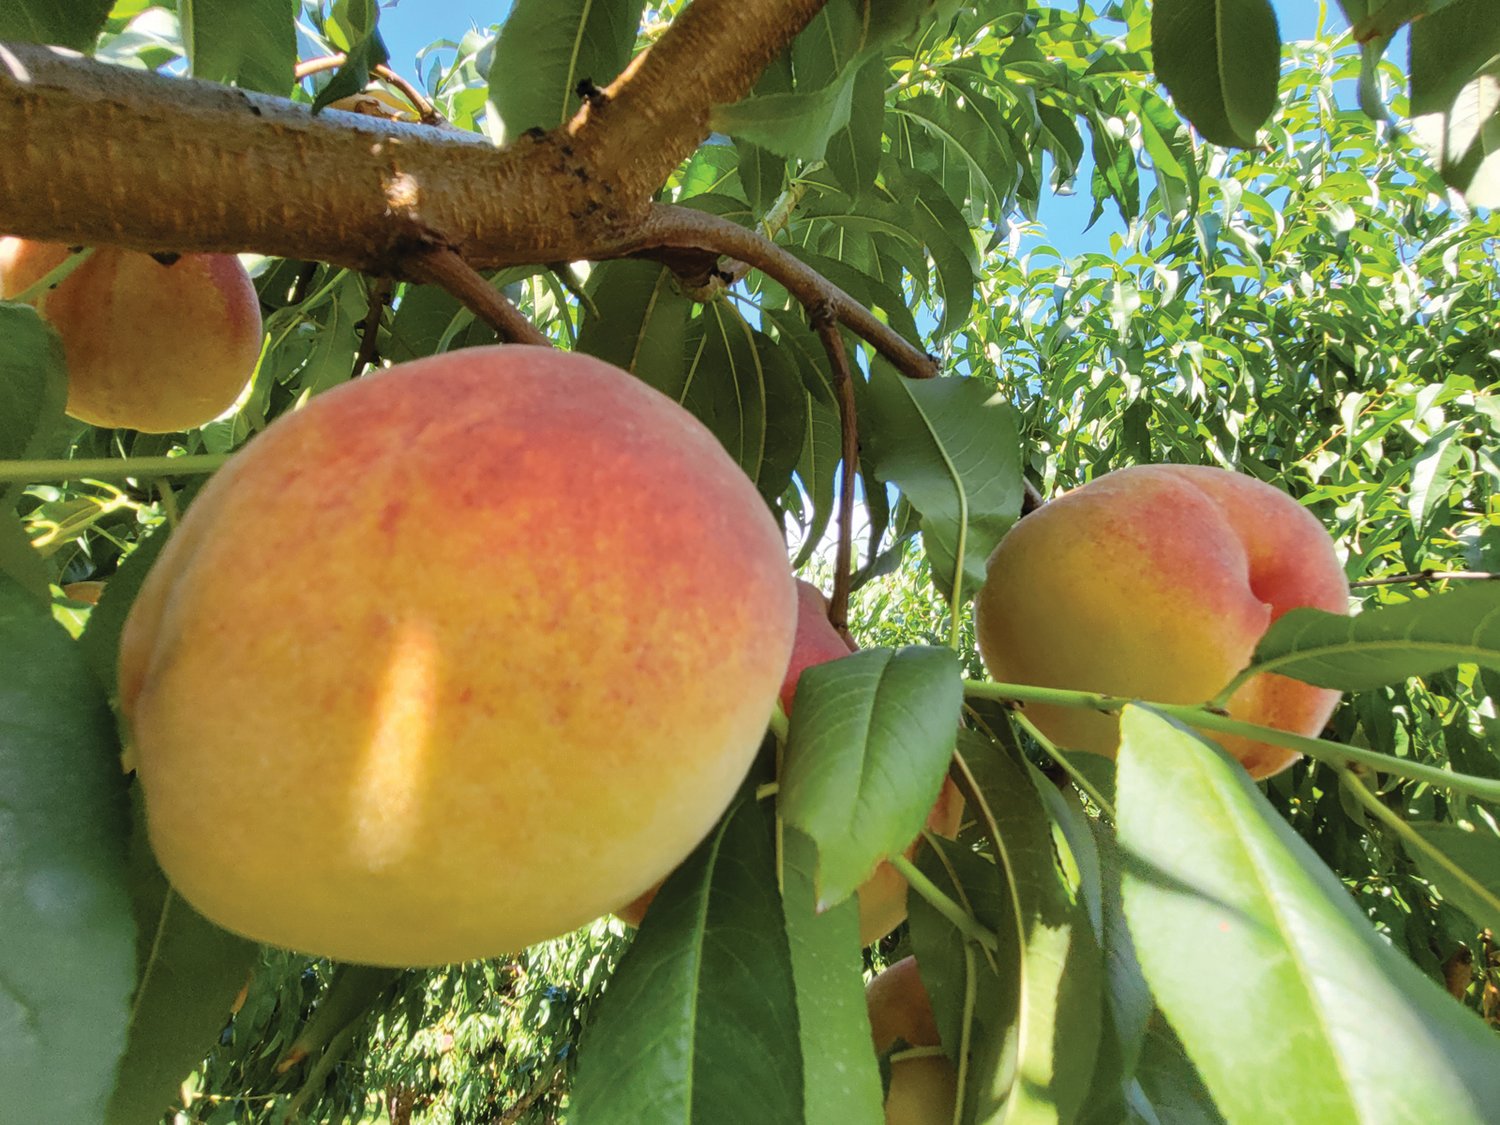 EAT A PEACH: Appleland also sells peaches, and provides the opportunity to pick-your-own.